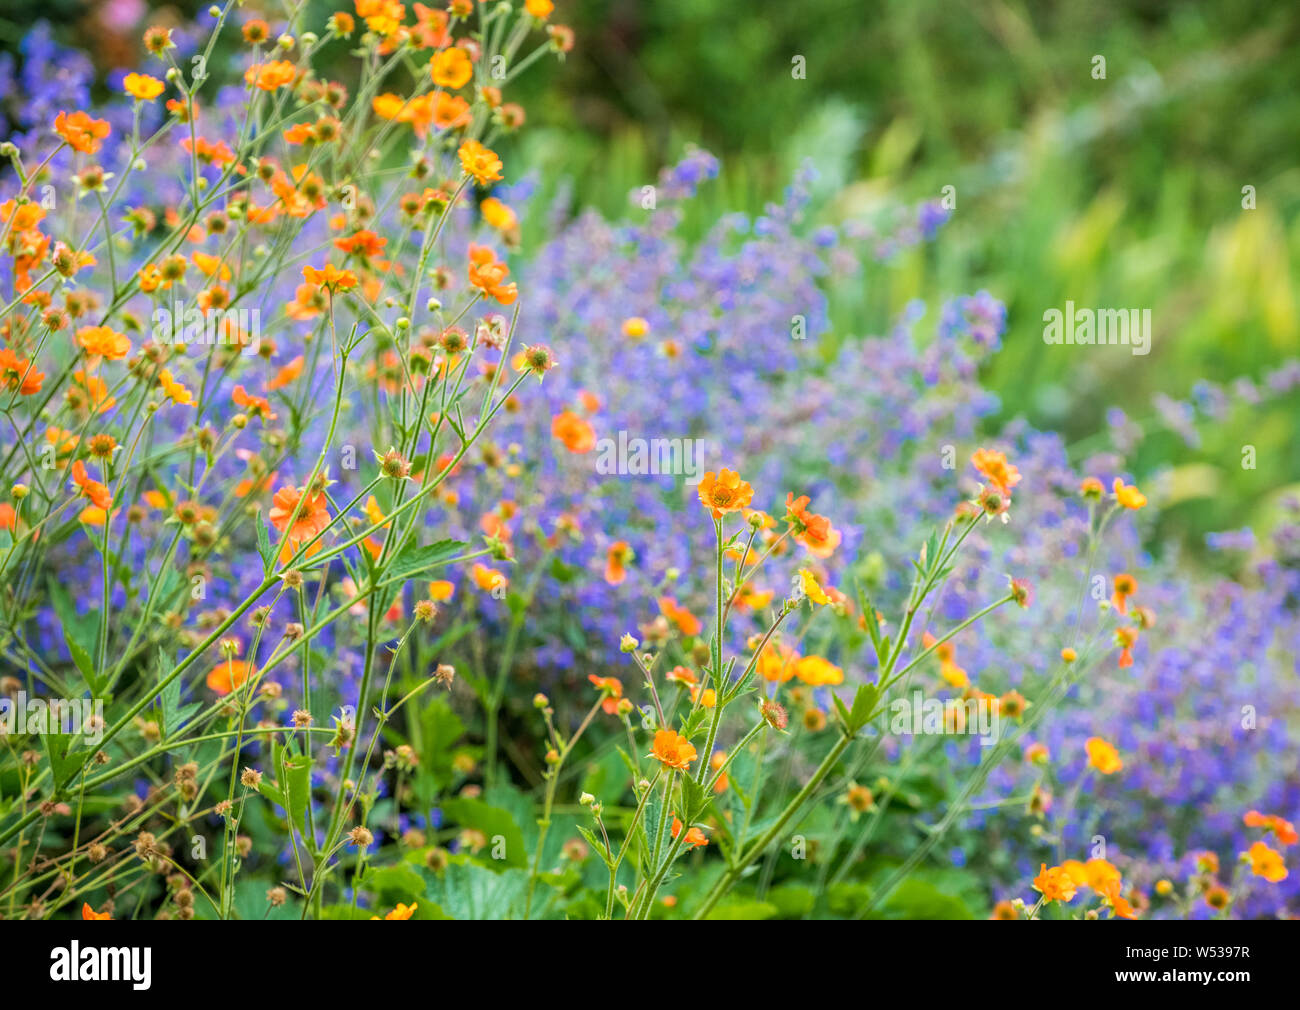 Out of focus images of colourful flowers simular to a Monet Impressionist painting. Stock Photo